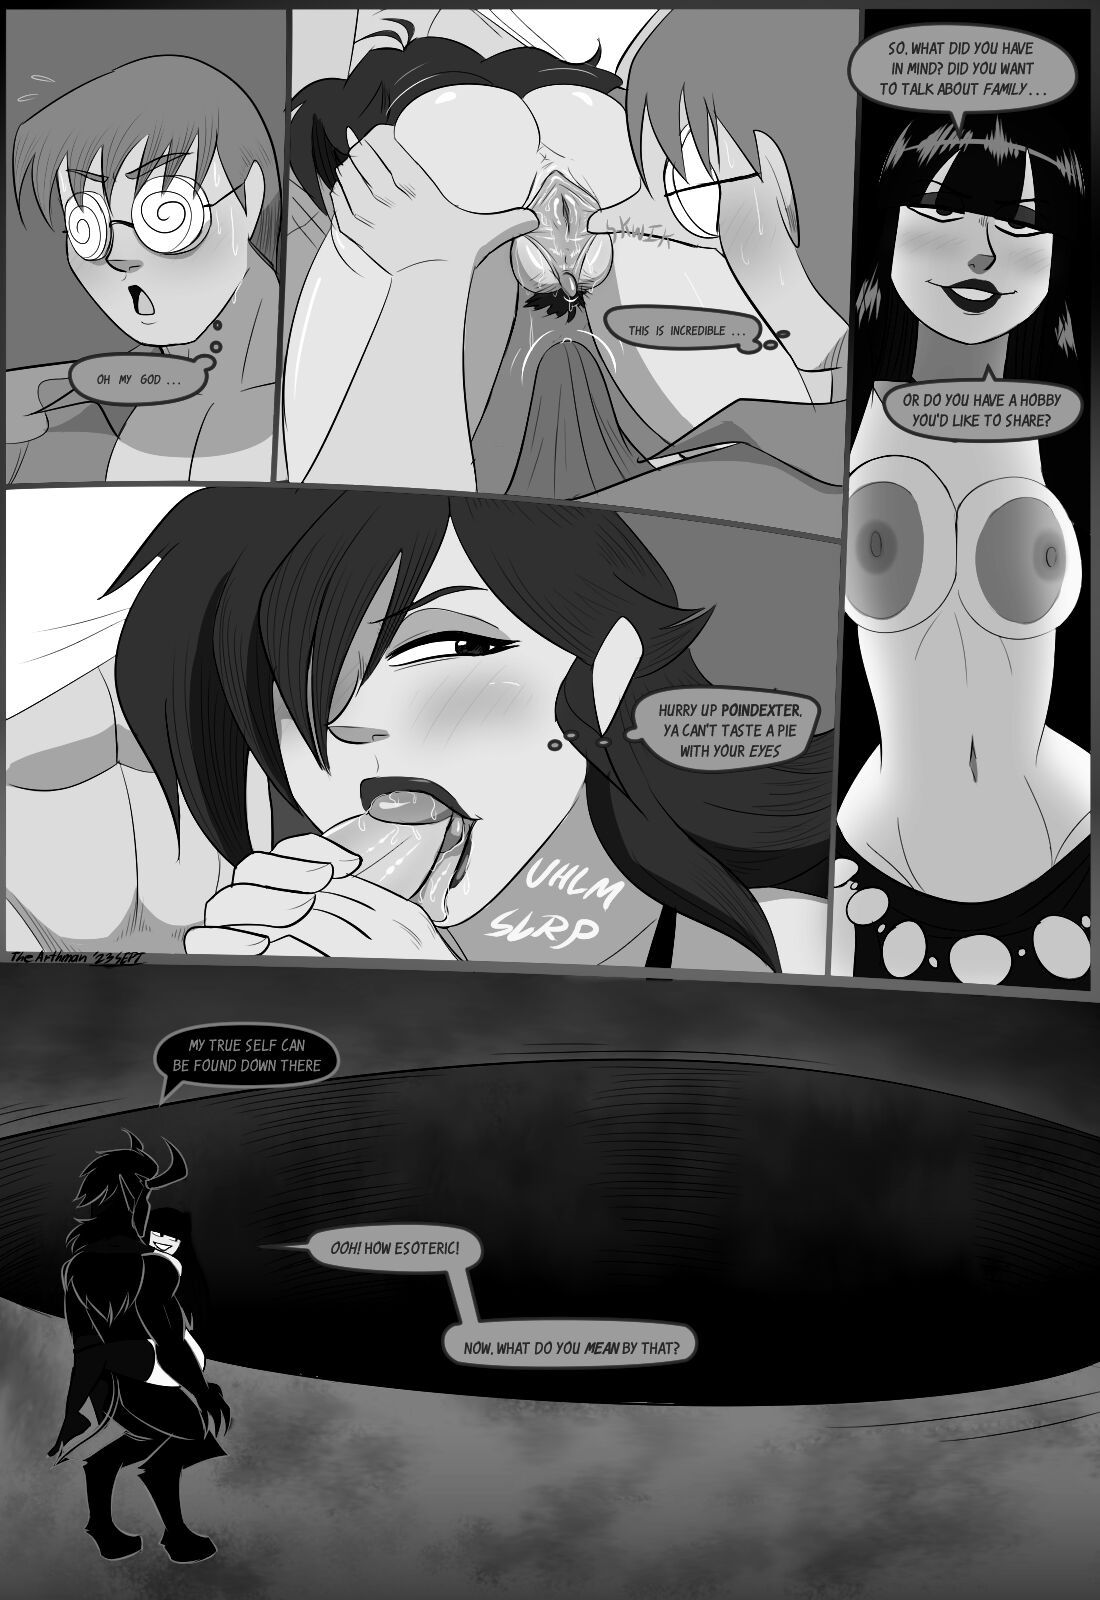 Dirtwater - Chapter 7 - Path of Sin Porn Comic english 24